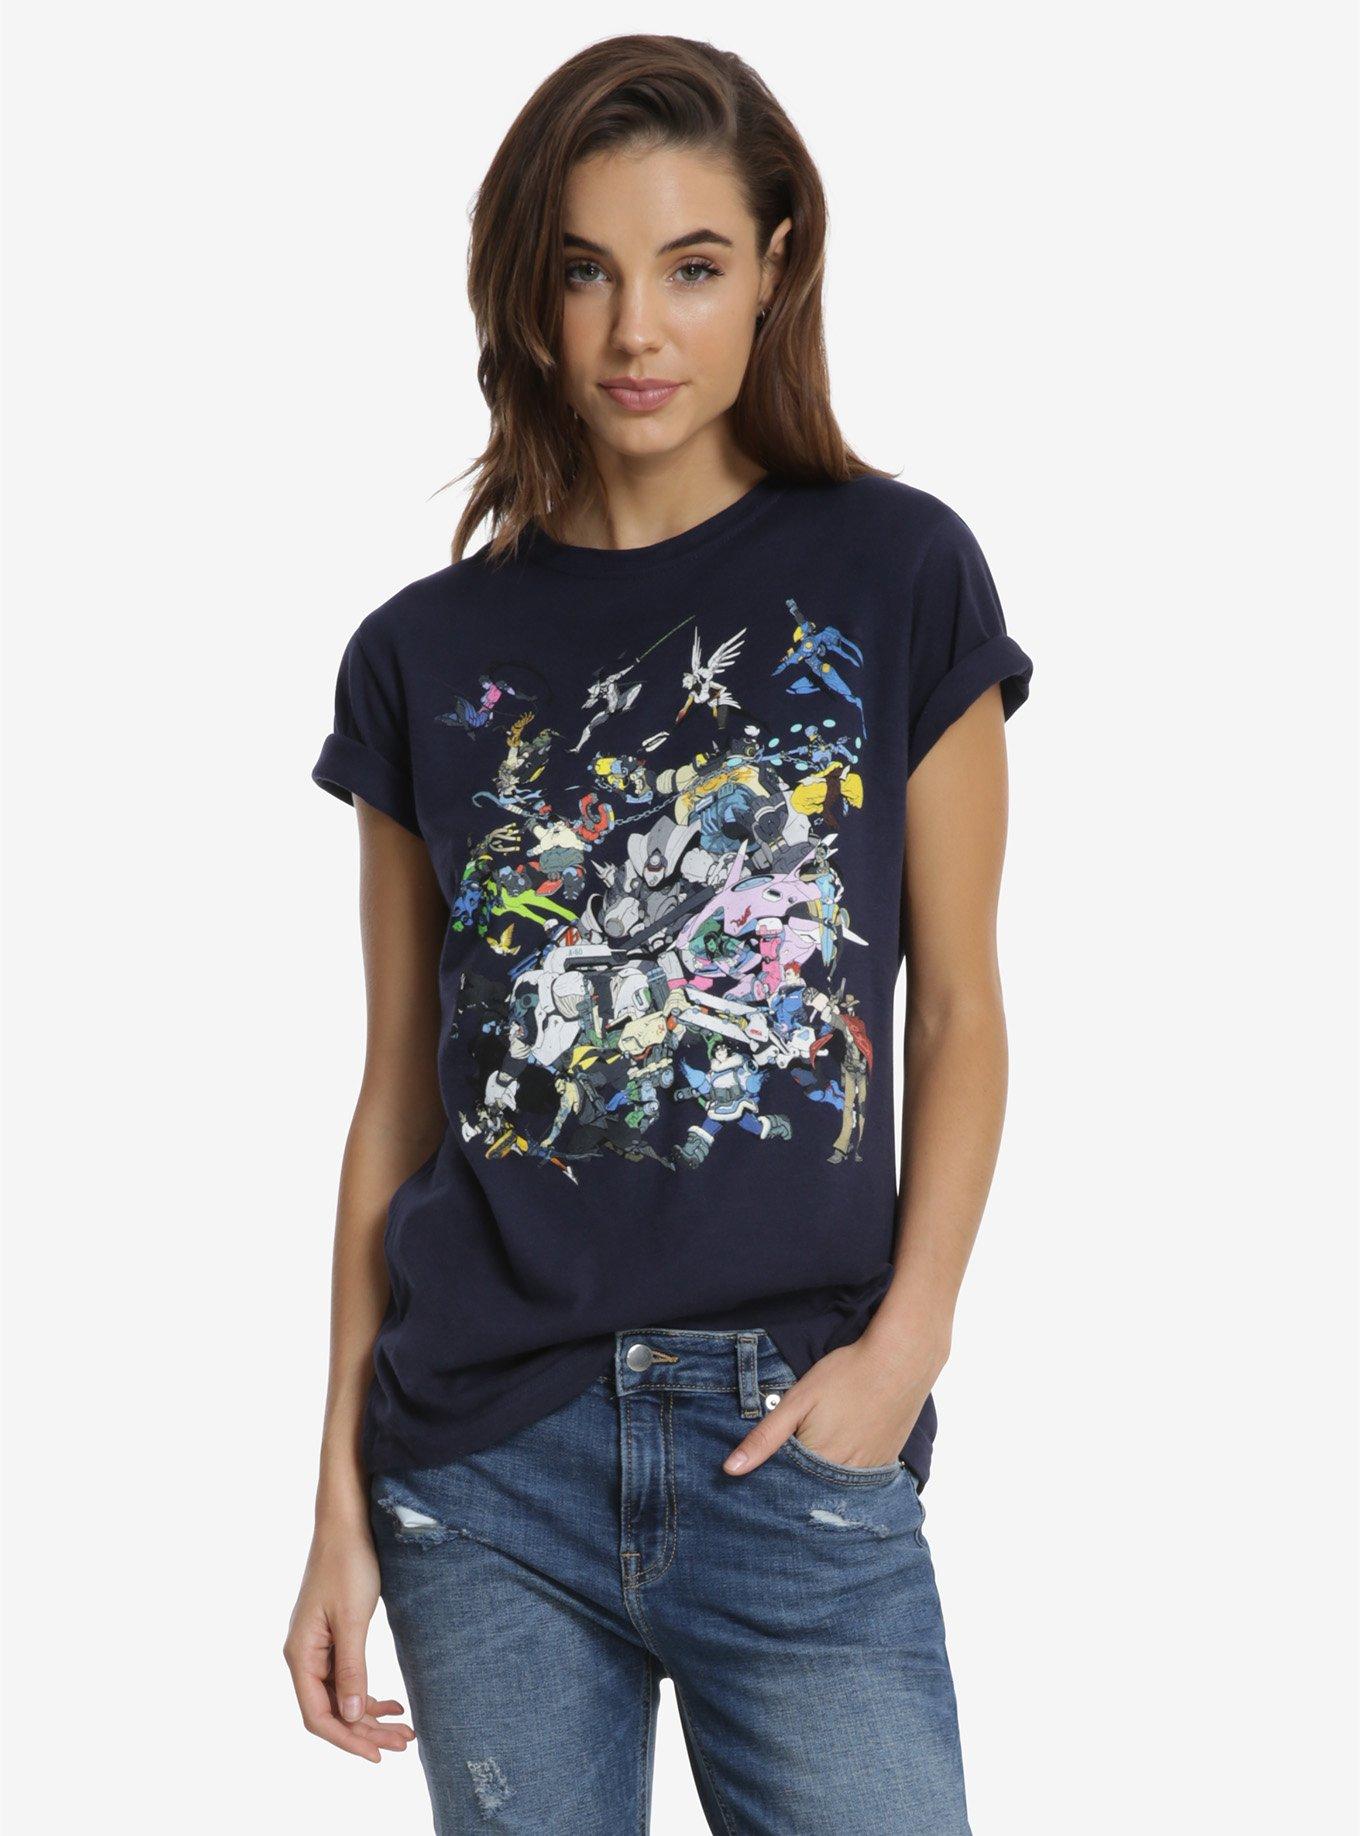 Overwatch Get To The Objective Womens Tee, BLUE, hi-res